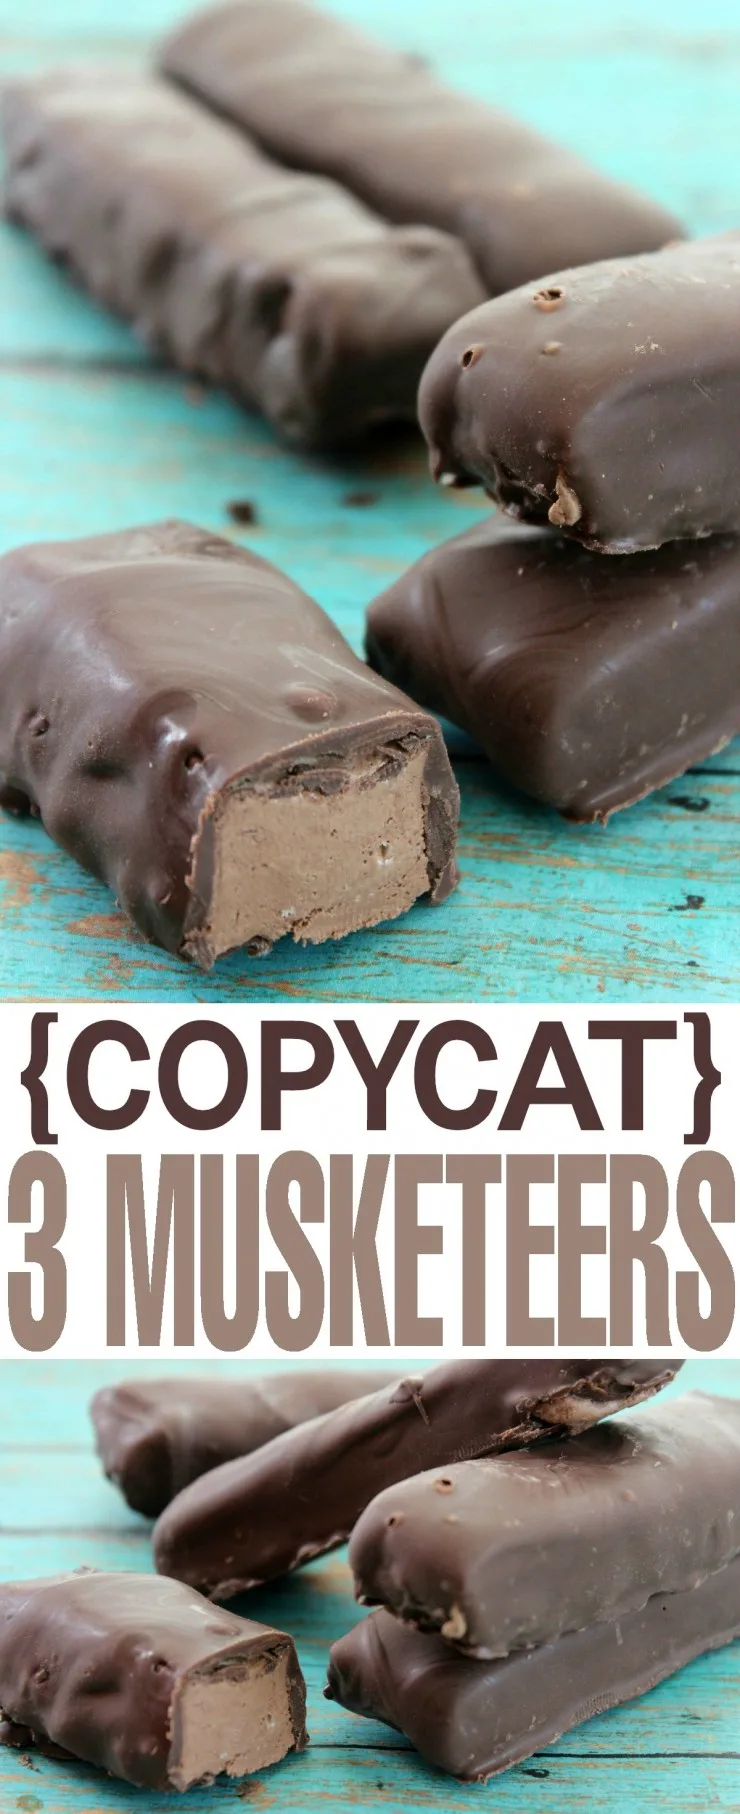 This copycat 3 musketeers recipe uses only 2 ingredients but tastes like the real thing!